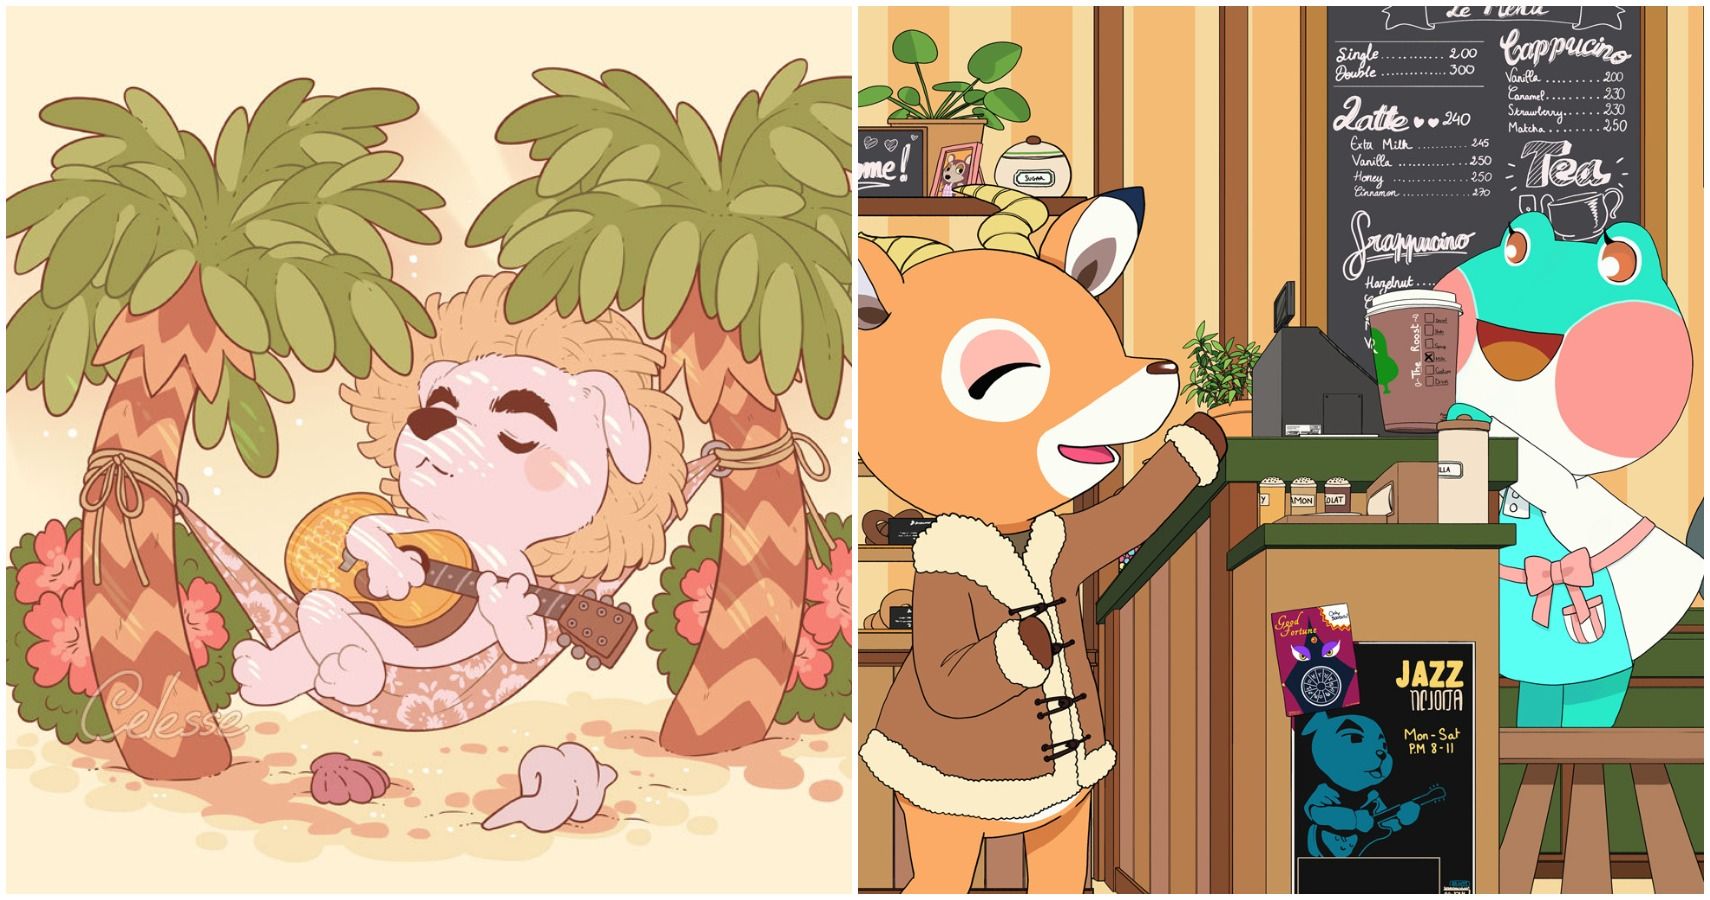 Animal Crossing New Horizons 10 Fan Art Pictures That Are Too Cute